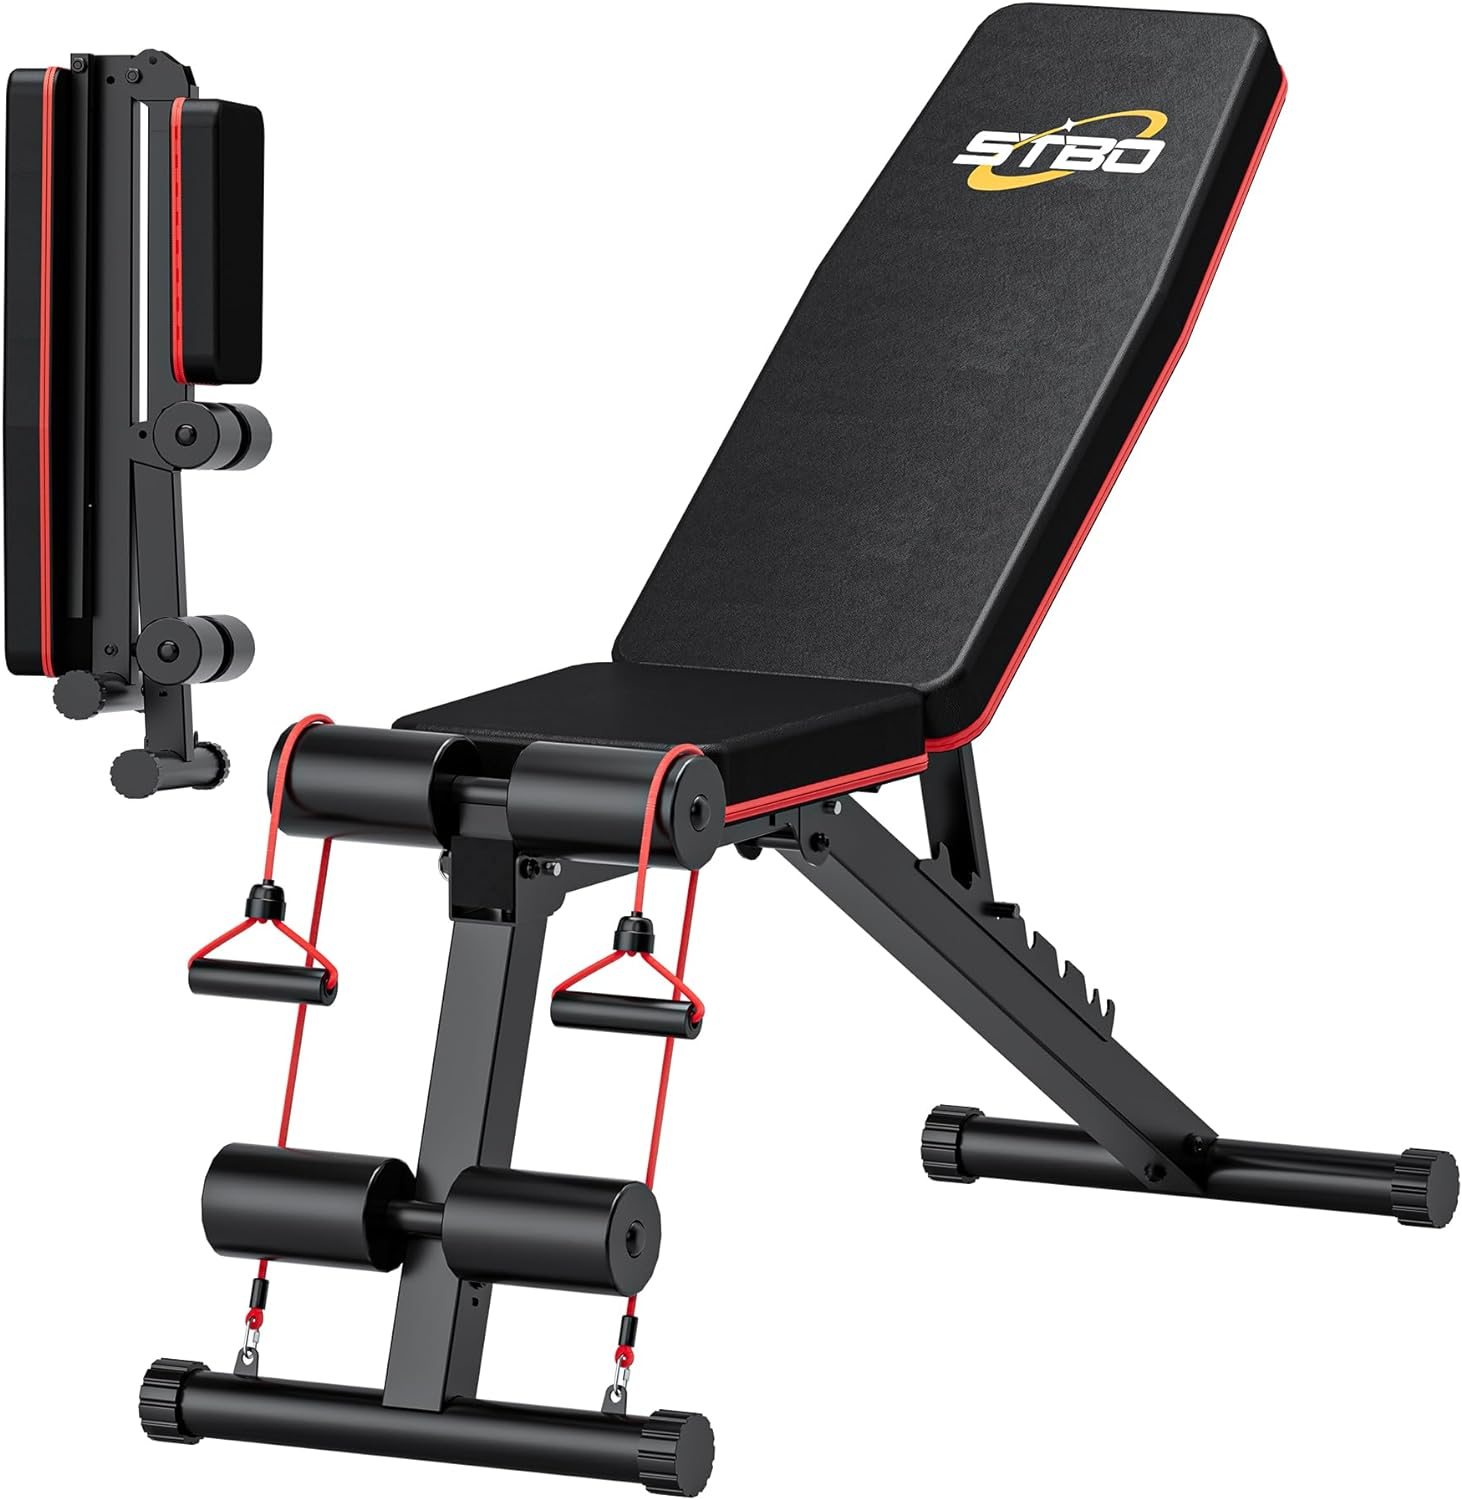 STBO Adjustable Folding Weight Bench,Foldable Incline Decline Workout Bench Sit Up Bench with Resistance Band,Multifunctional Bench Home Gym Equipment for Full Body Workout